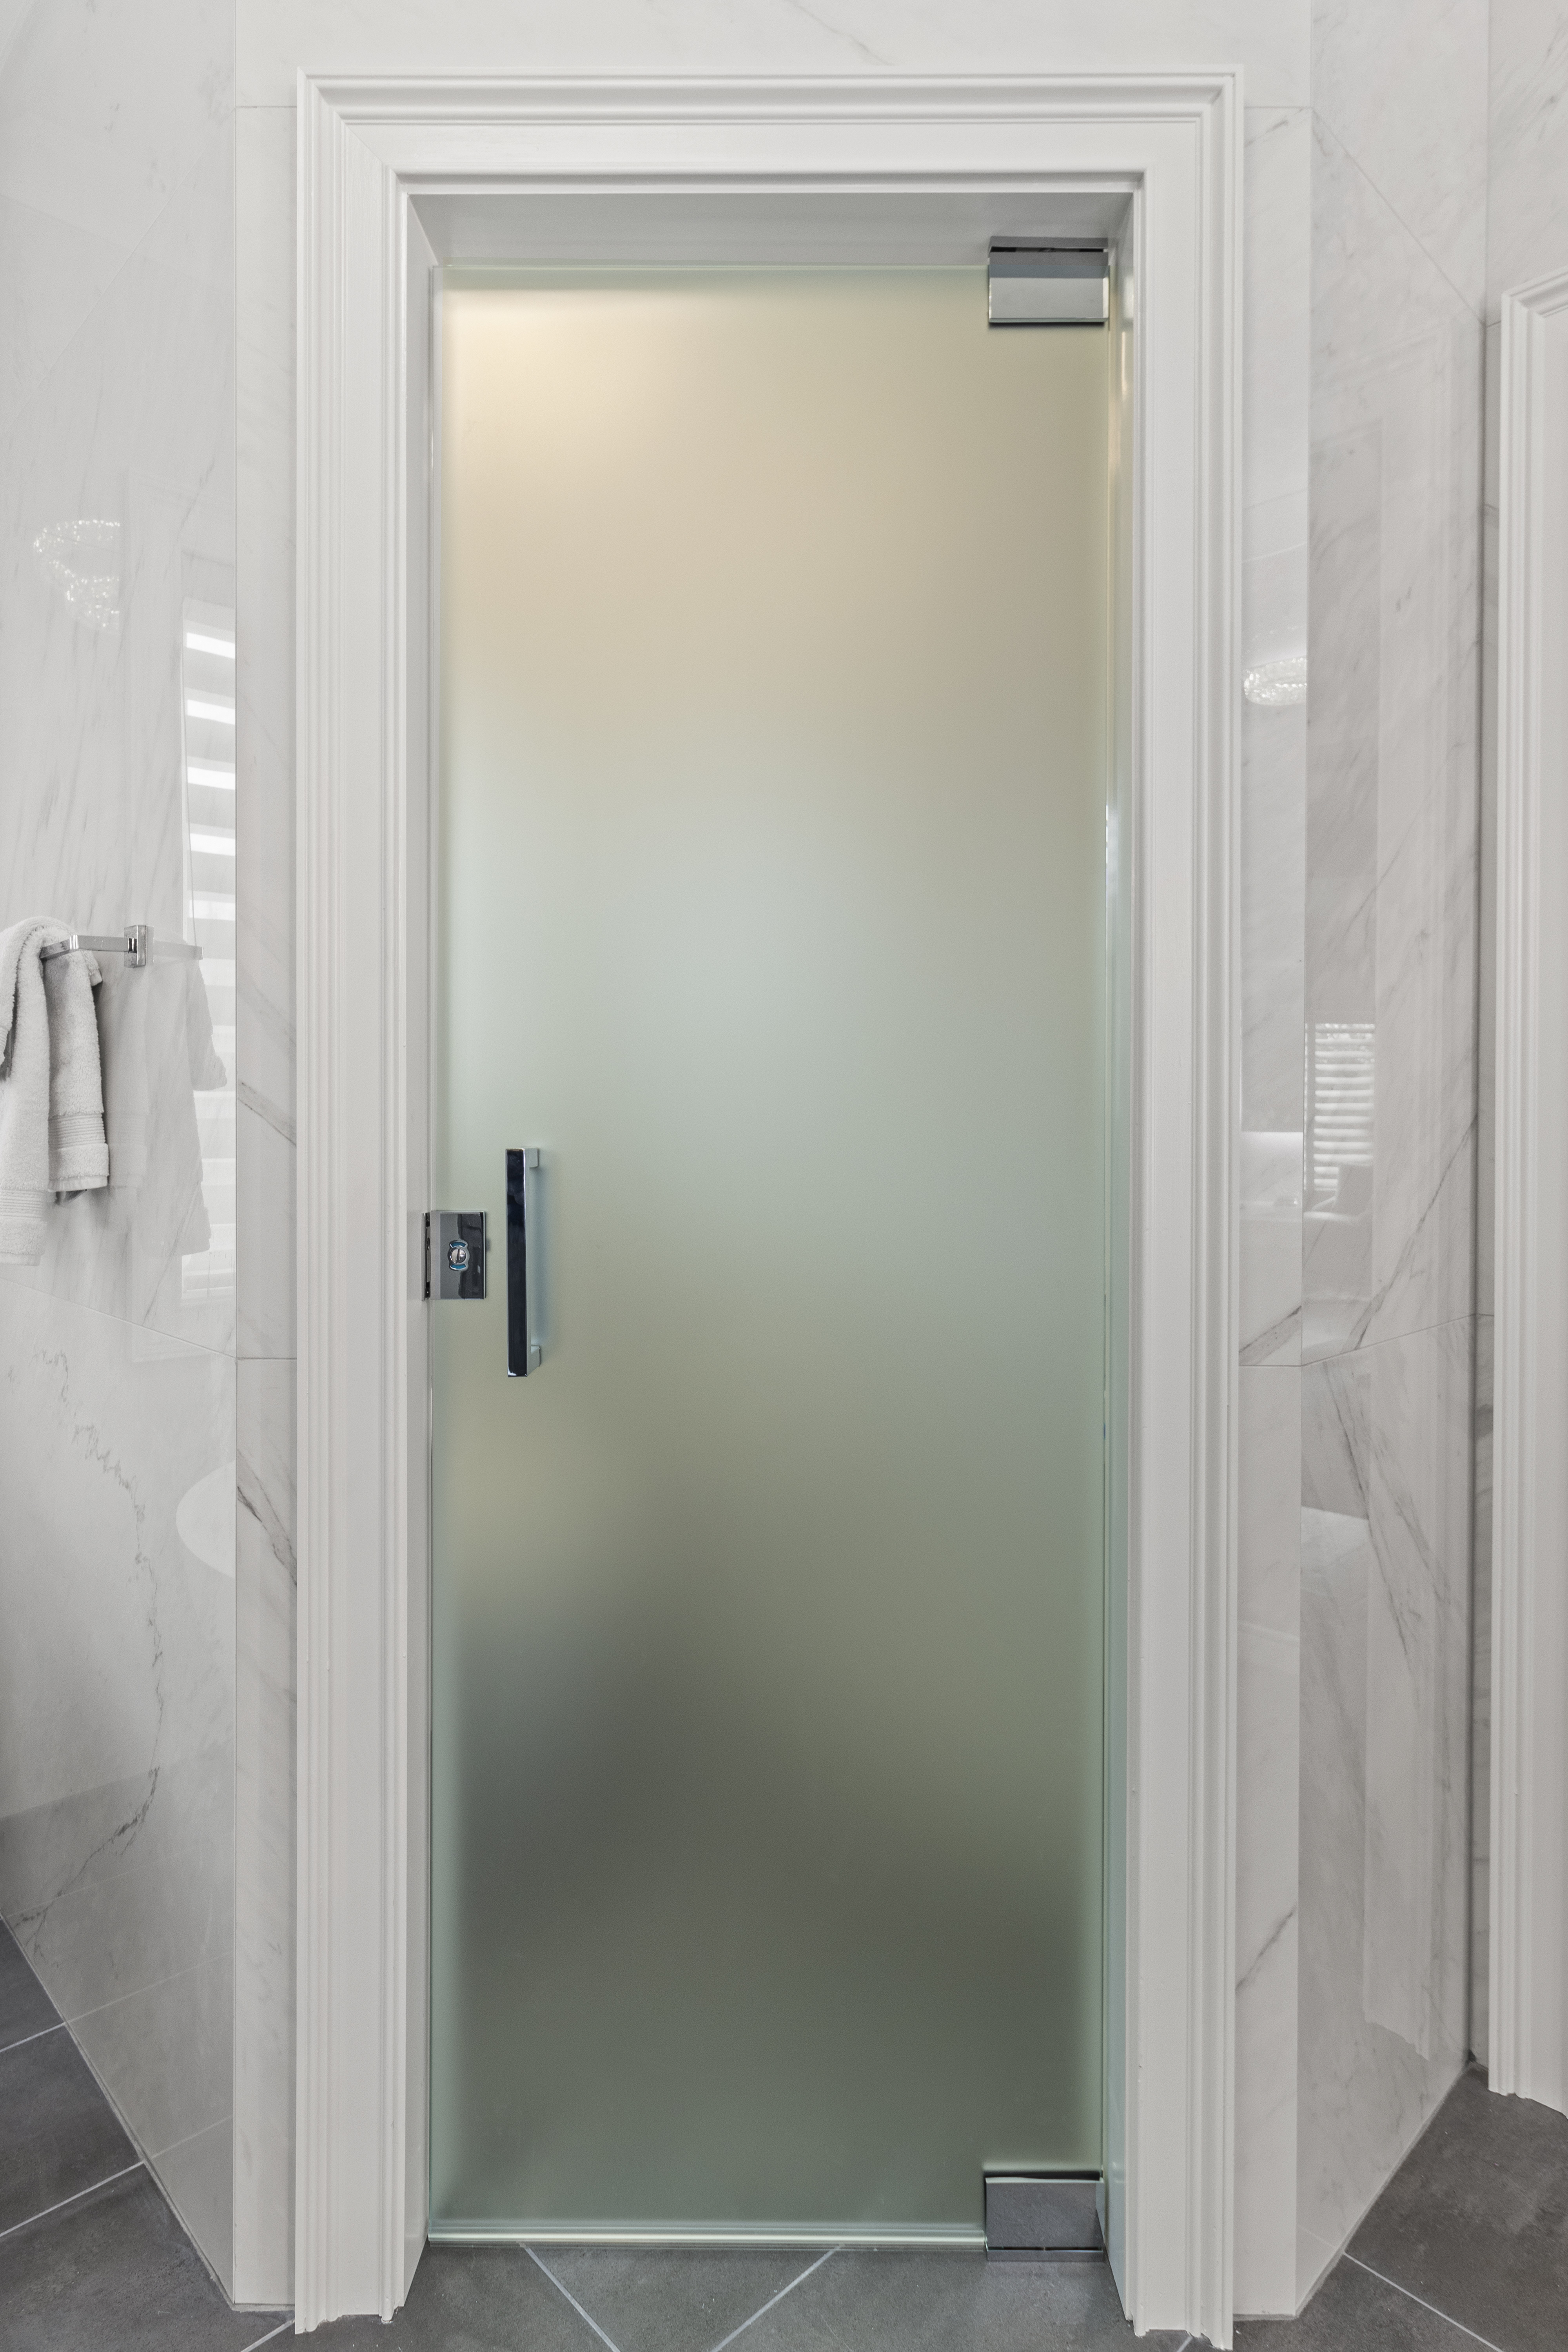 This is a satin/frosted glass toilet partition with a locking mechanism on the door!